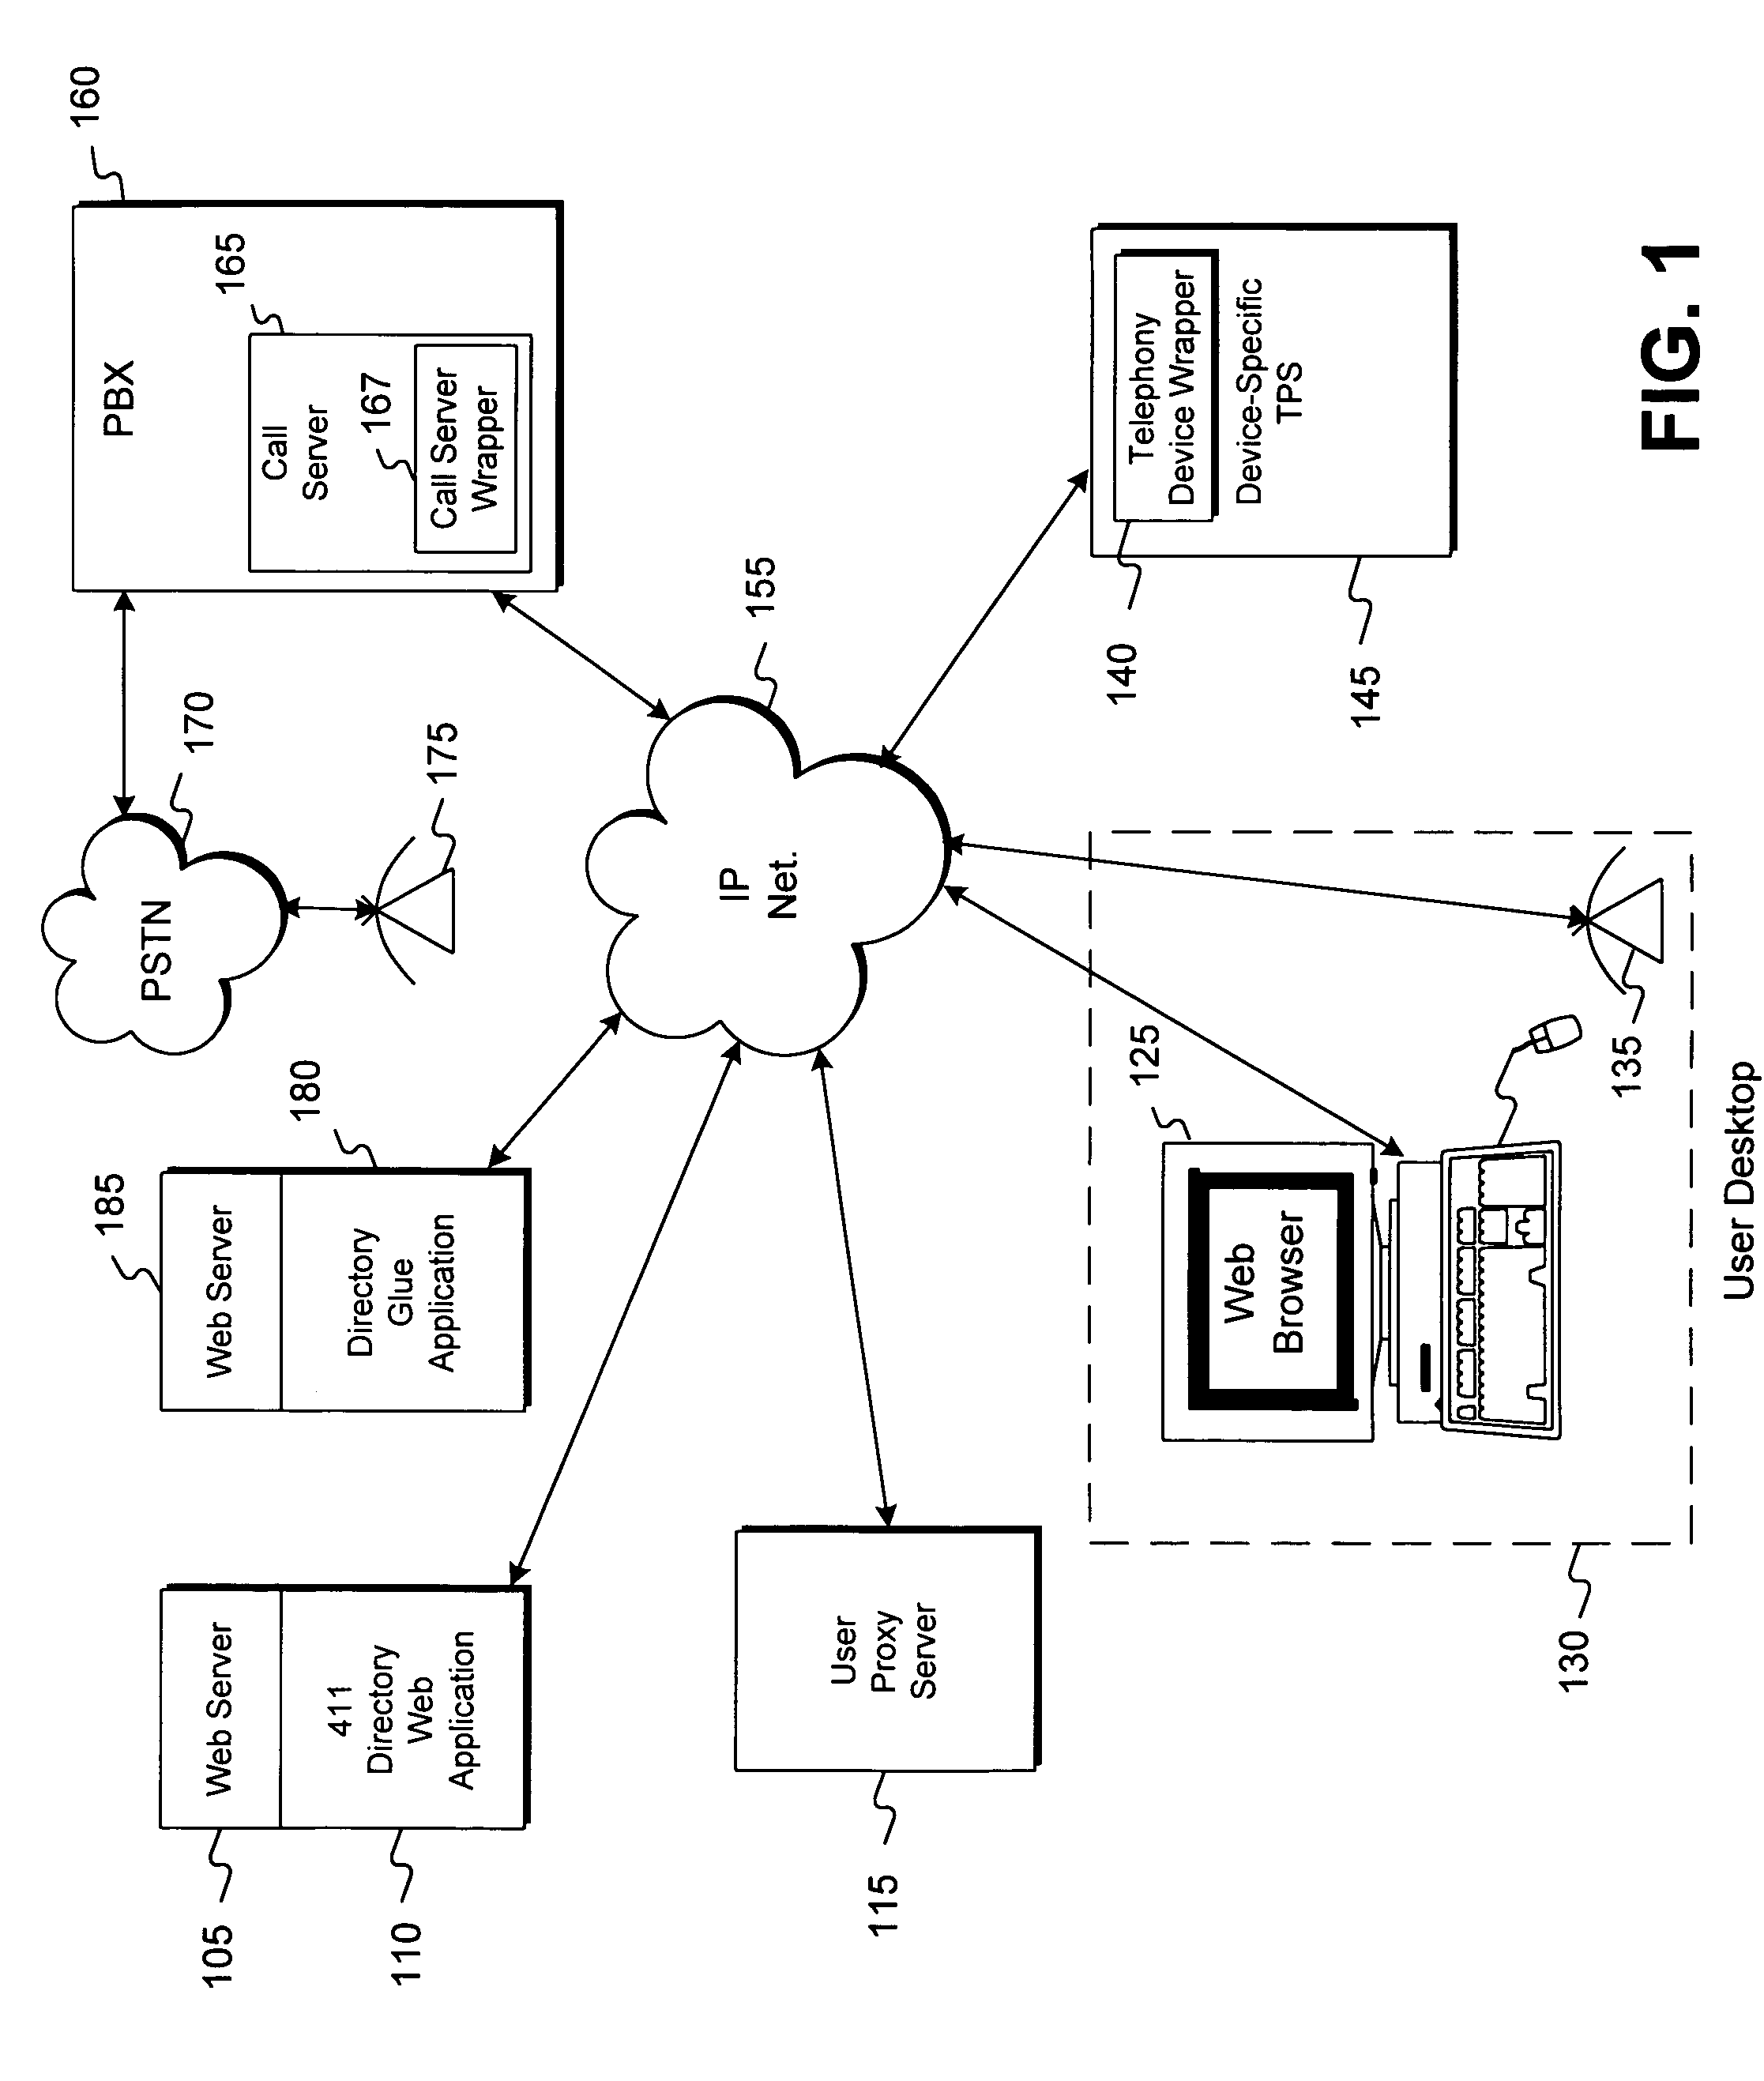 Method, apparatus and article of manufacture for web-based control of a unified multi-service communication system